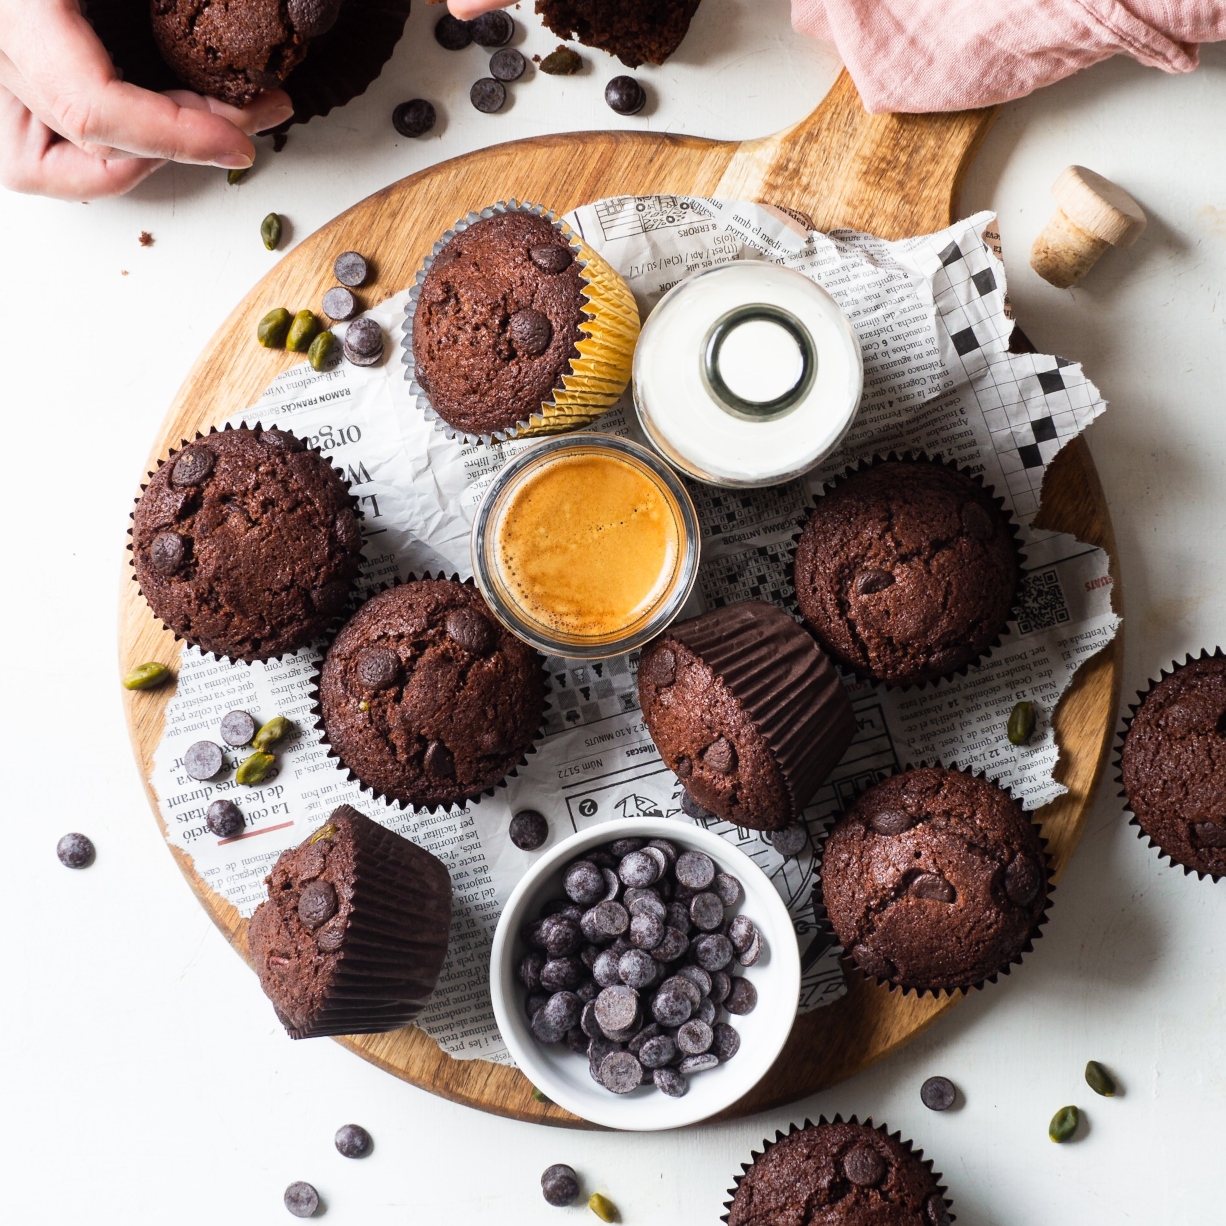 Chocolate chip muffins on a board with scattered chocolate chips and seeds, an espresso and some milk